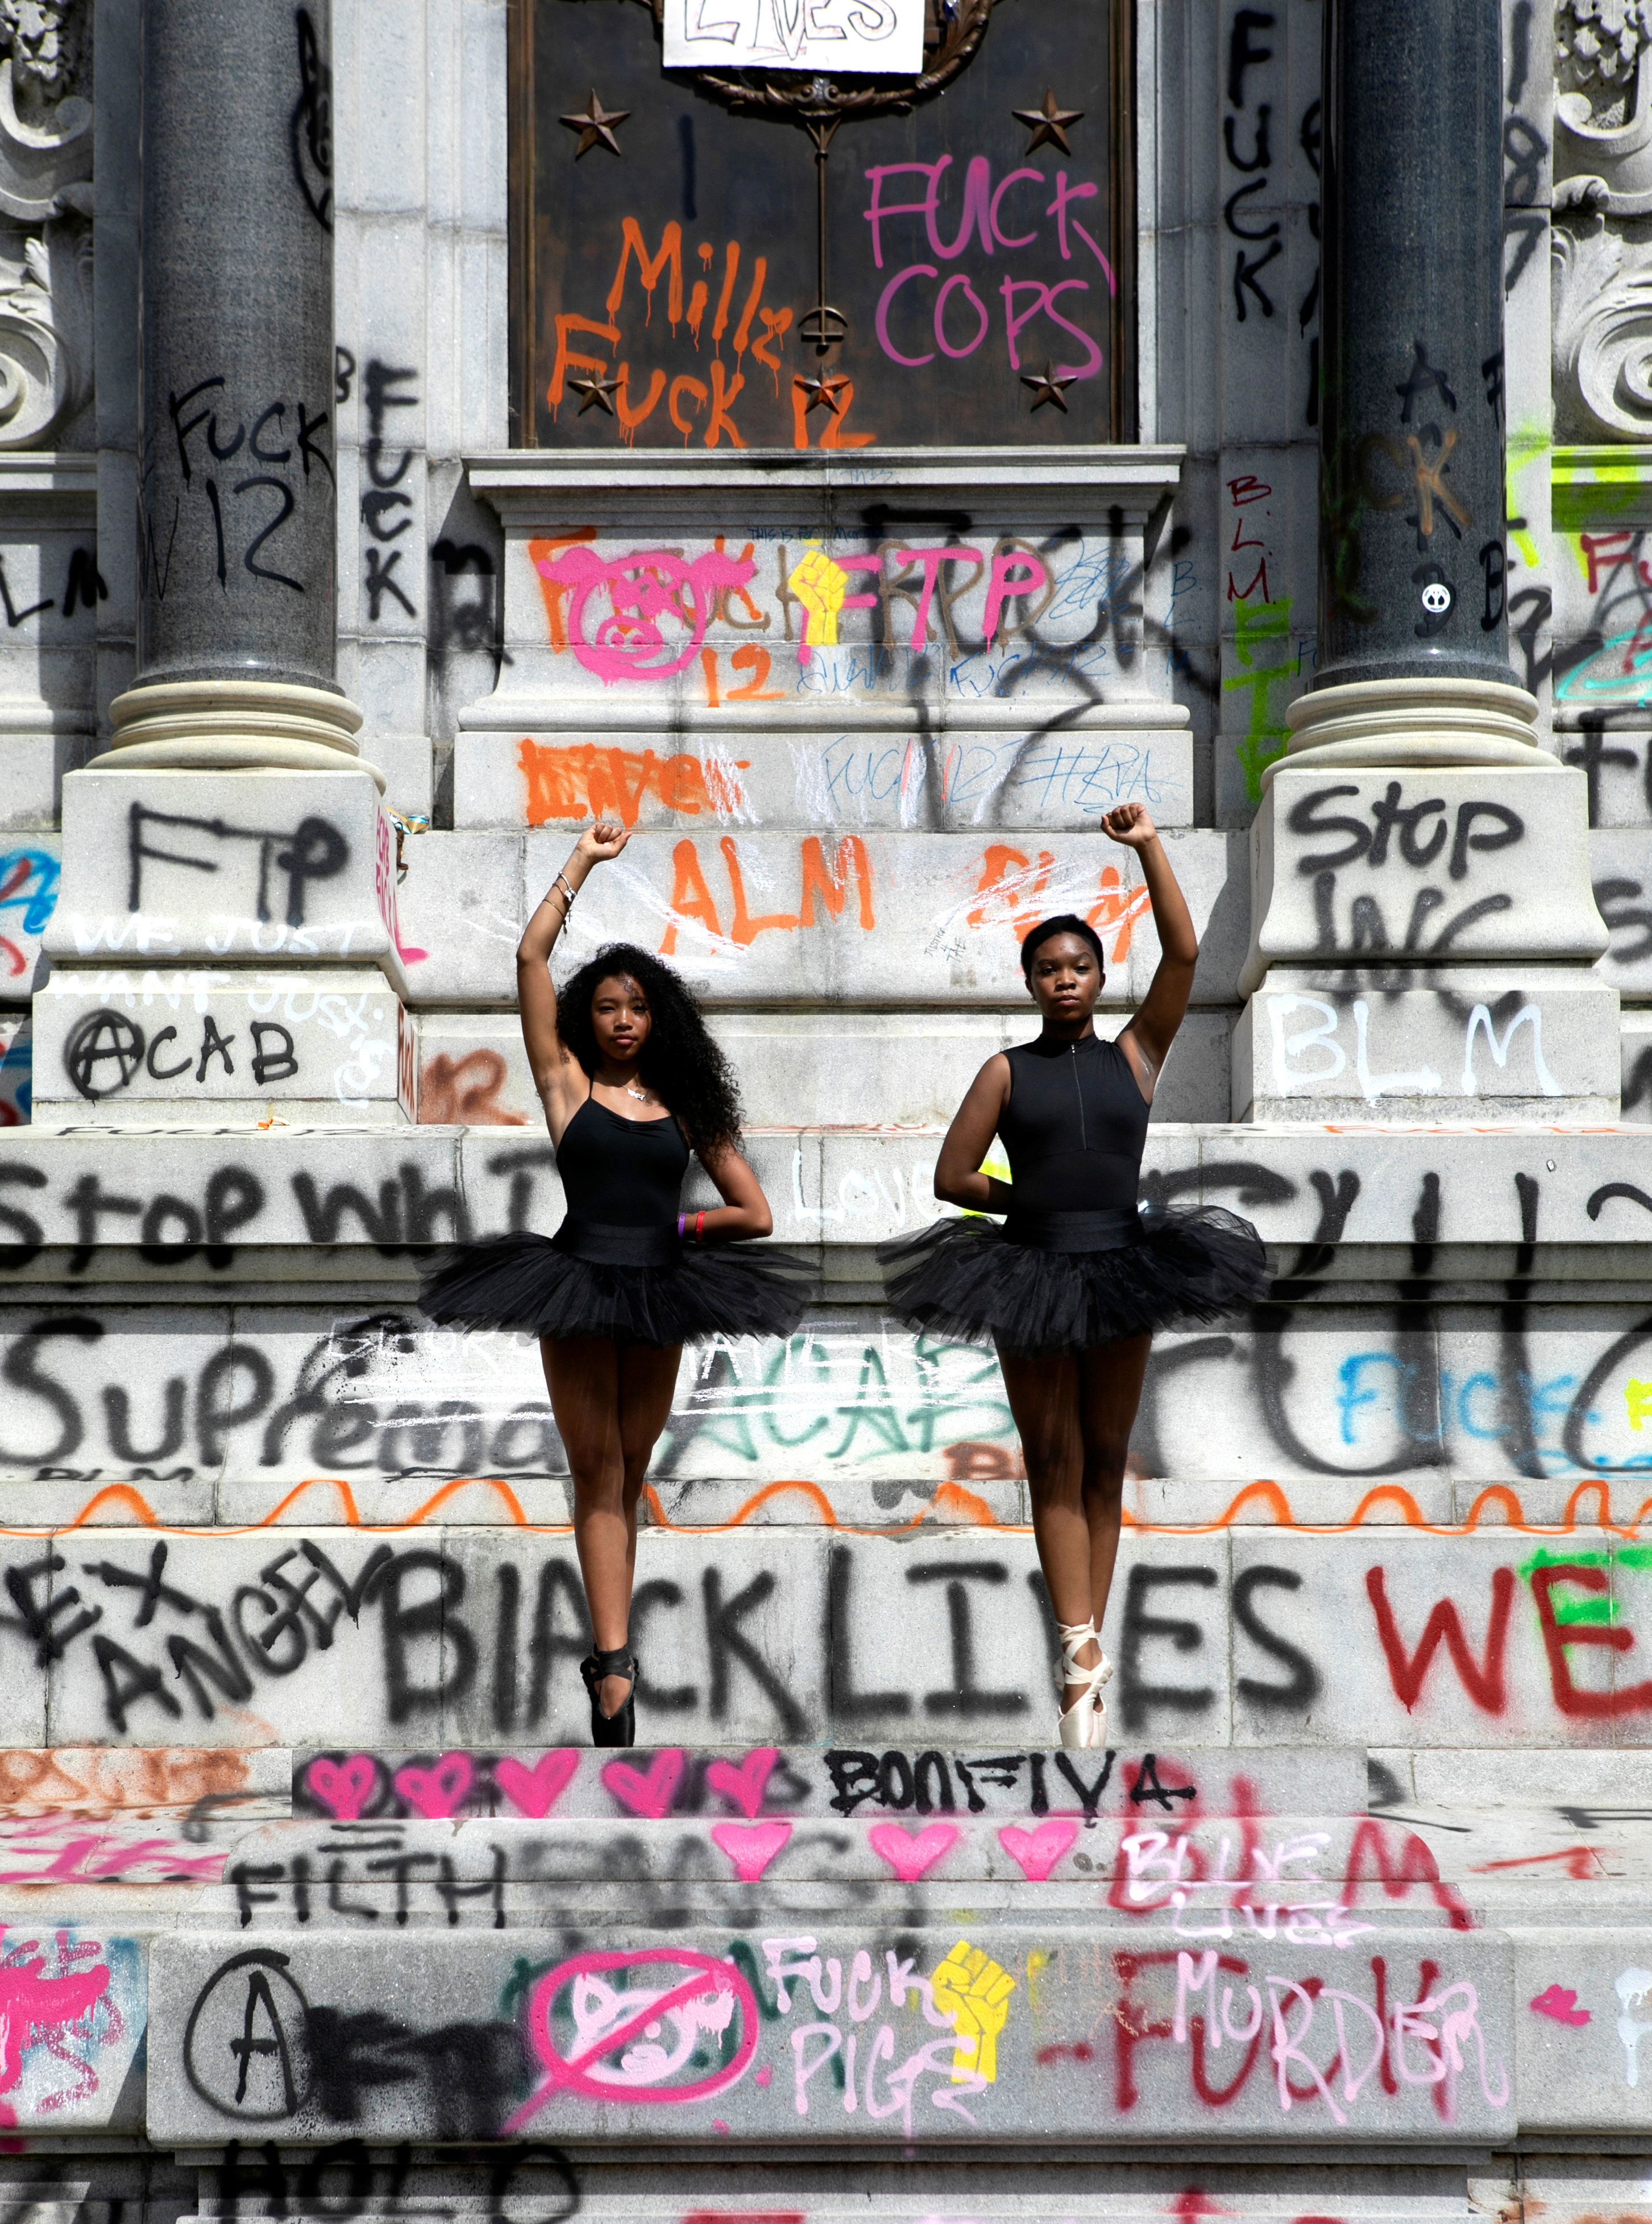 Two teenaged Black ballerinas pose in fifth position en pointe, each dancer raising a fist. They are standing on a graffiti-covered Confederate monument. The dancers are wearing black leotards and black tutus.